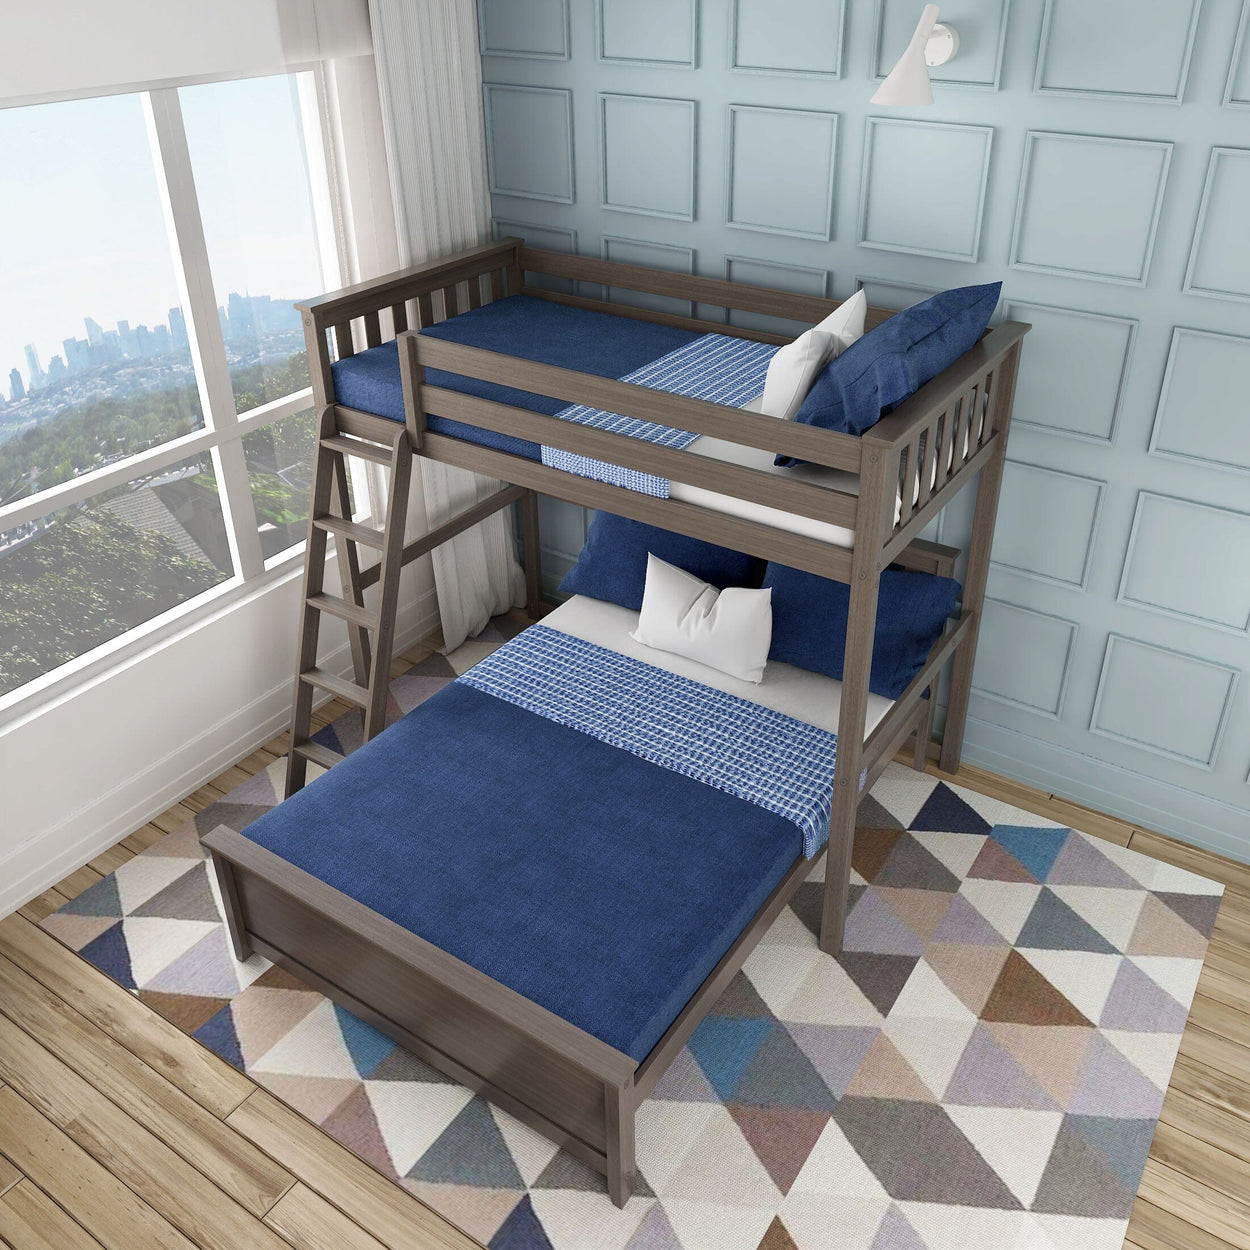 18-812-151 : Bunk Beds L-Shaped Twin over Full Bunk Bed, Clay